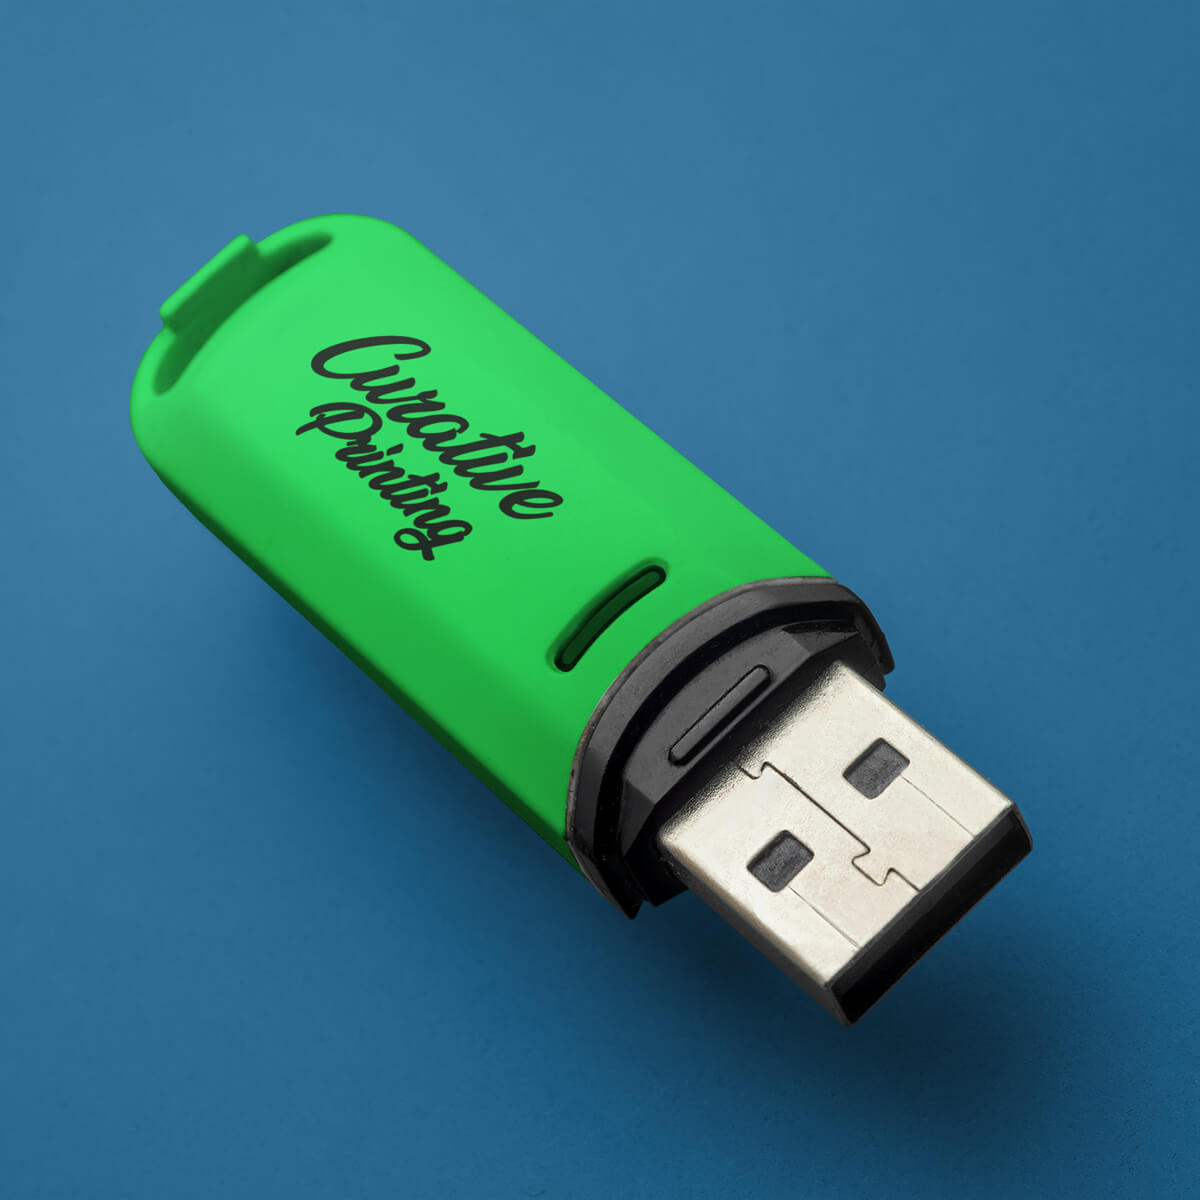 Navy background behind a green USB flash drive promotional technology by curative printing